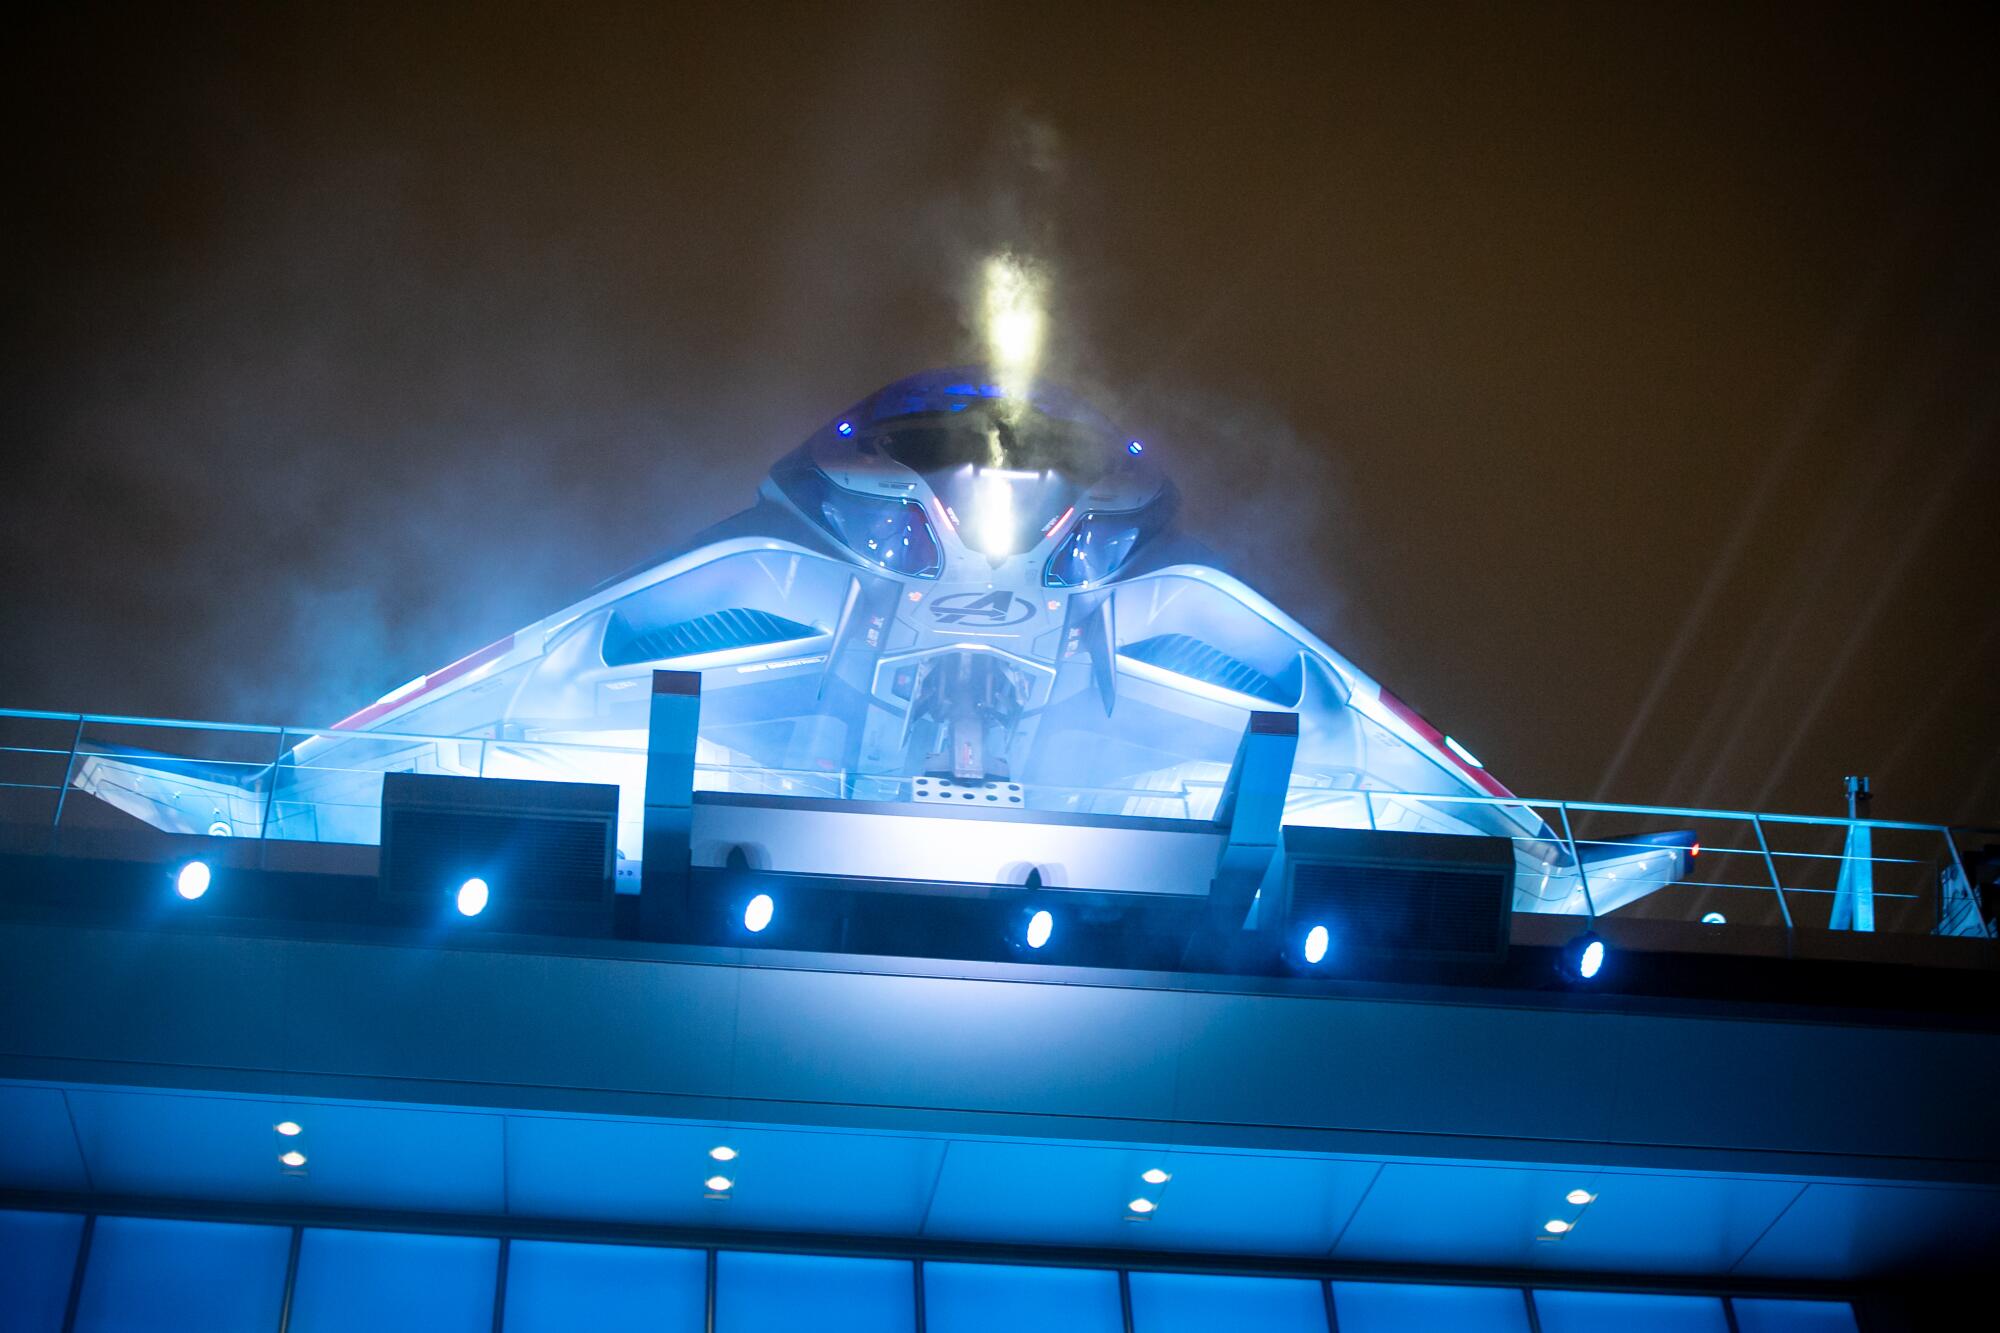 The Quinjet, illuminated with the Avengers logo, is docked on a high platform.